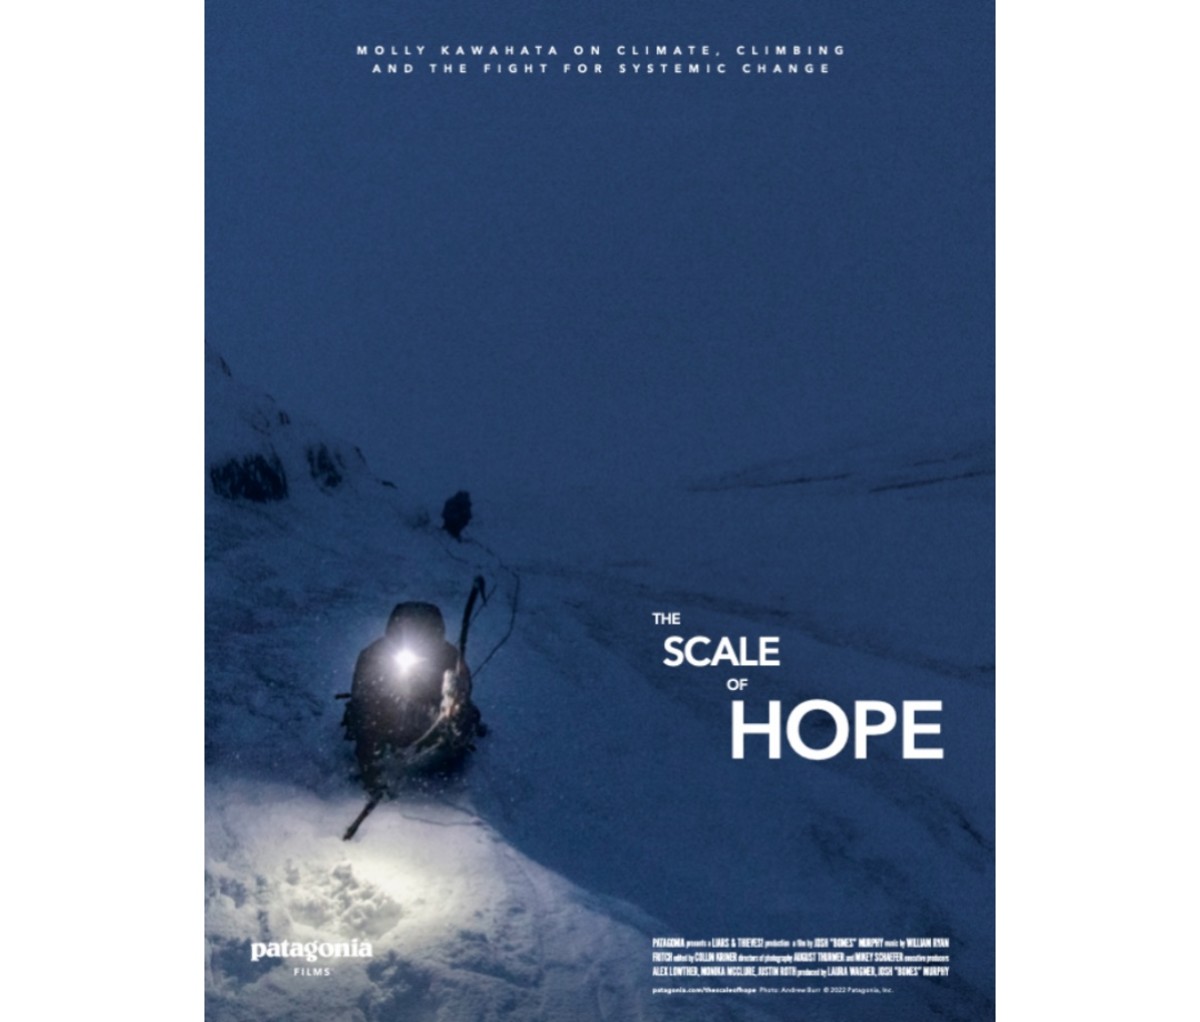 Watch Patagonia's new documentary, The Scale of Hope, to learn how to affect change.